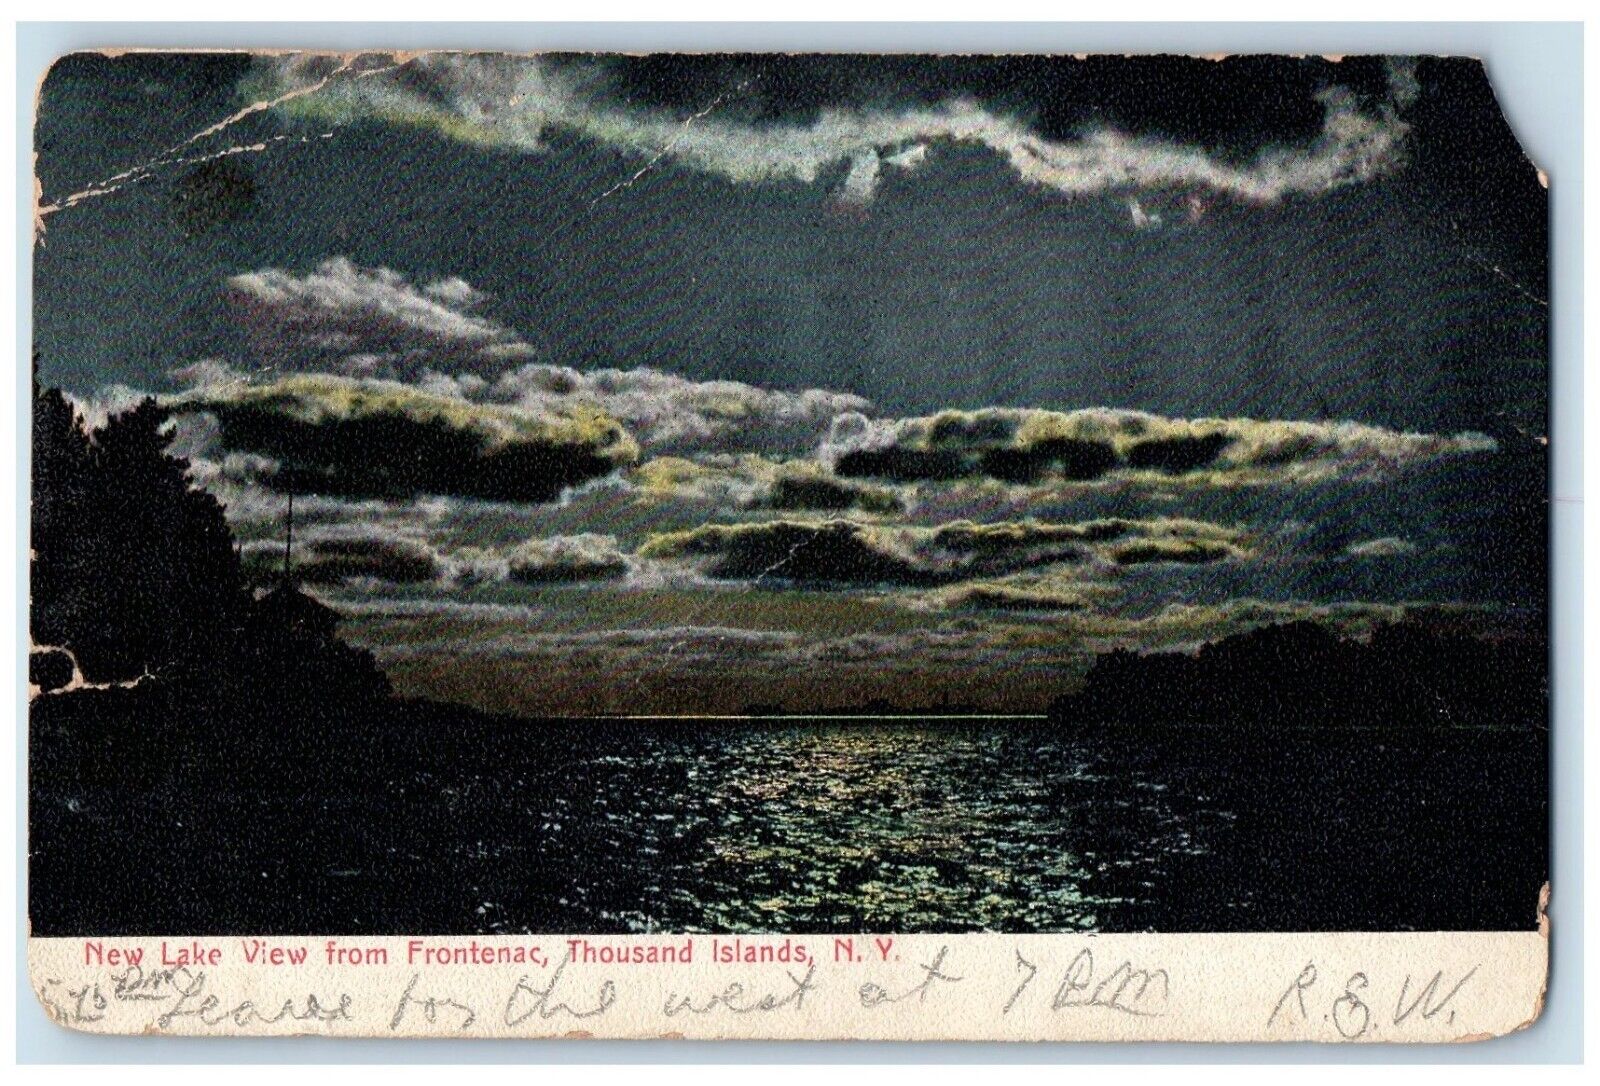 1907 New Lake View From Frontenac Thousand Islands New York NY Antique Postcard